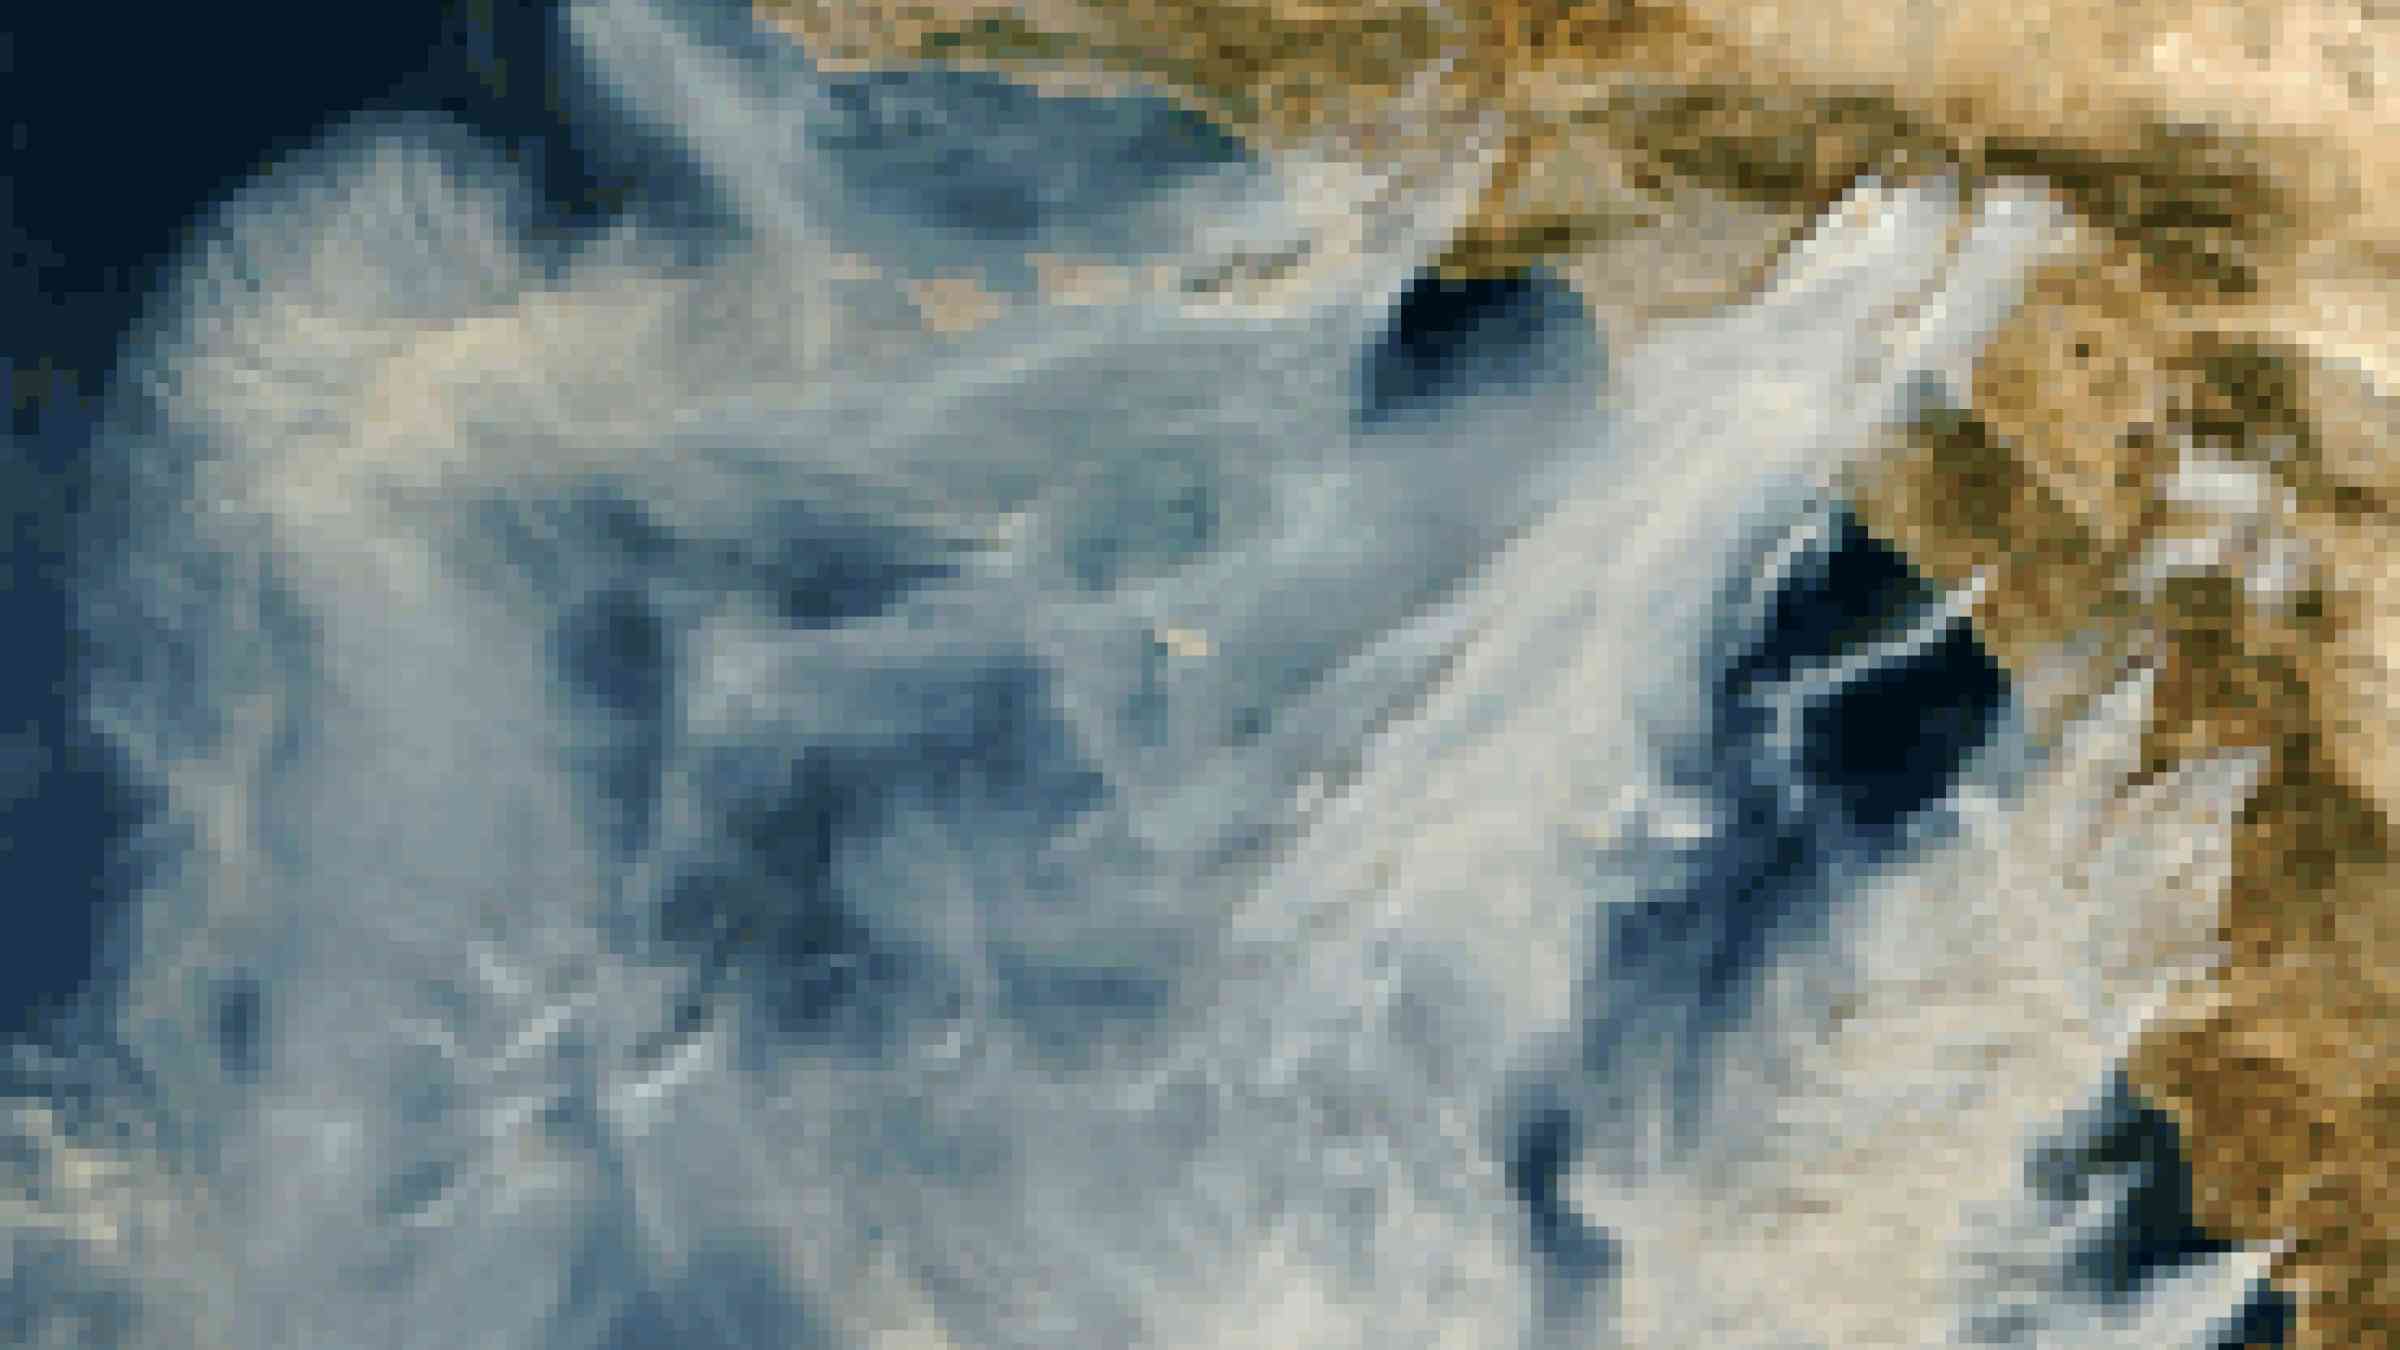 photo by F. Boosman, Calif. wildfires from space